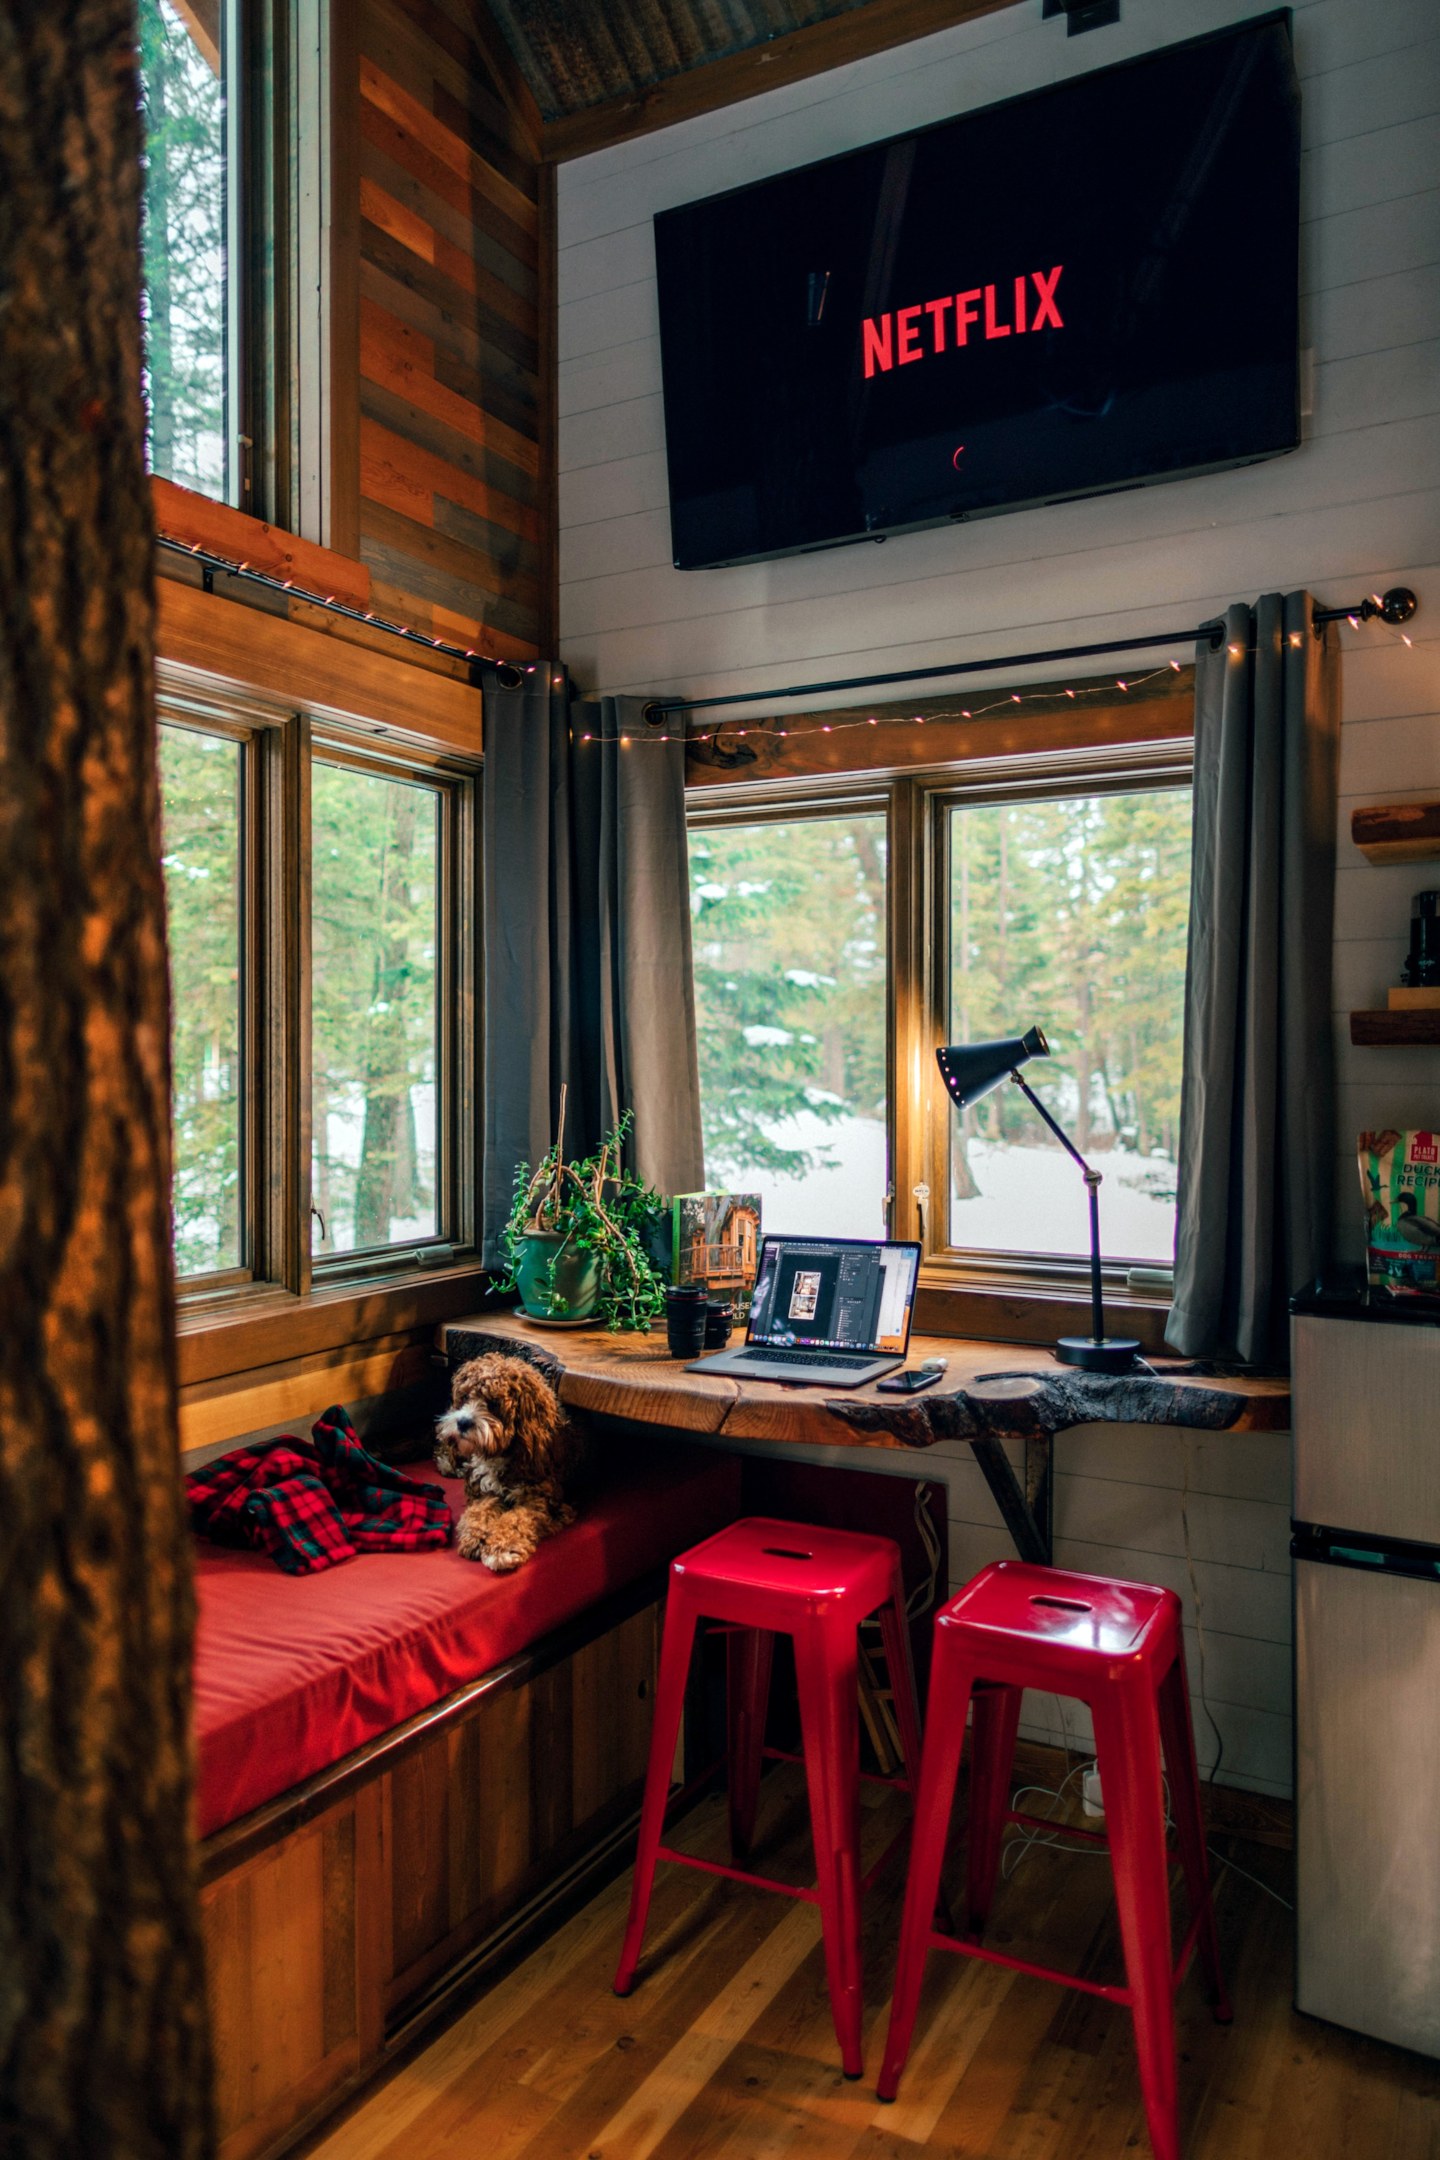 A dog sits on a red bench window seat cushion, with a TV screen showing Netflix visible above, and a computer laptop open on a desk with two red bar stools.